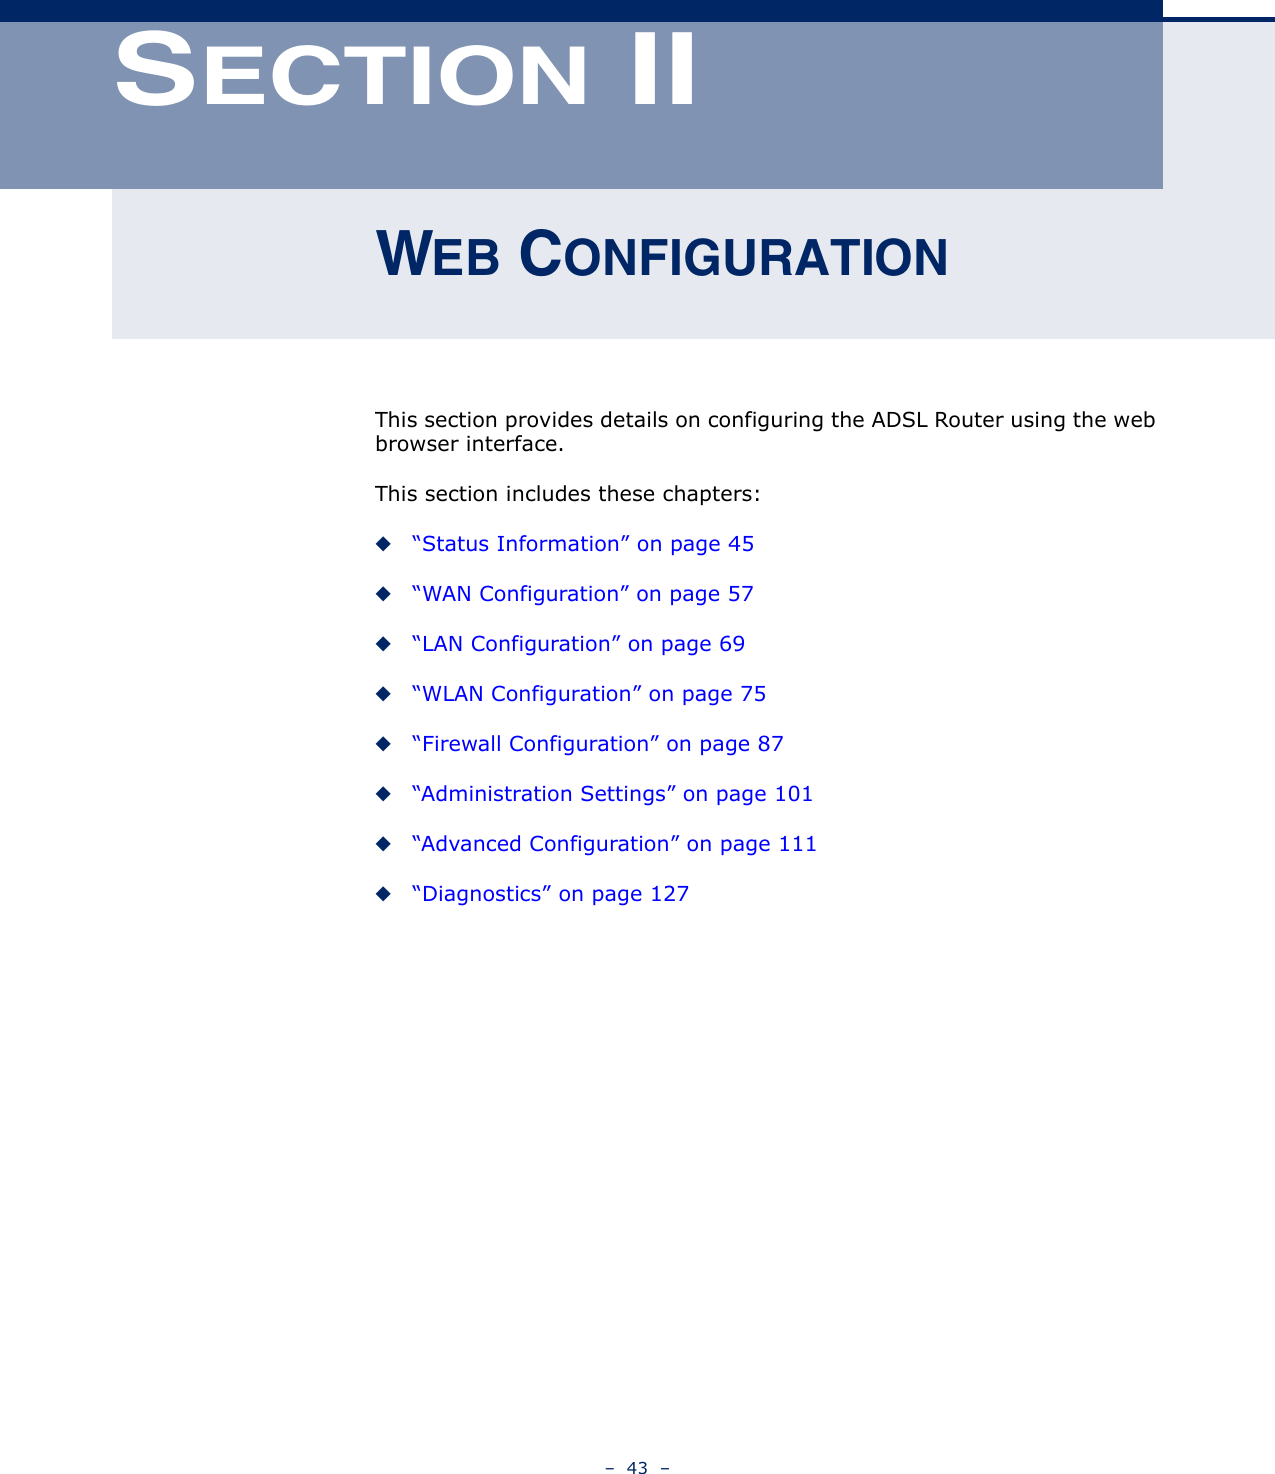 –  43  –SECTION IIWEB CONFIGURATIONThis section provides details on configuring the ADSL Router using the web browser interface.This section includes these chapters:◆“Status Information” on page 45◆“WAN Configuration” on page 57◆“LAN Configuration” on page 69◆“WLAN Configuration” on page 75◆“Firewall Configuration” on page 87◆“Administration Settings” on page 101◆“Advanced Configuration” on page 111◆“Diagnostics” on page 127